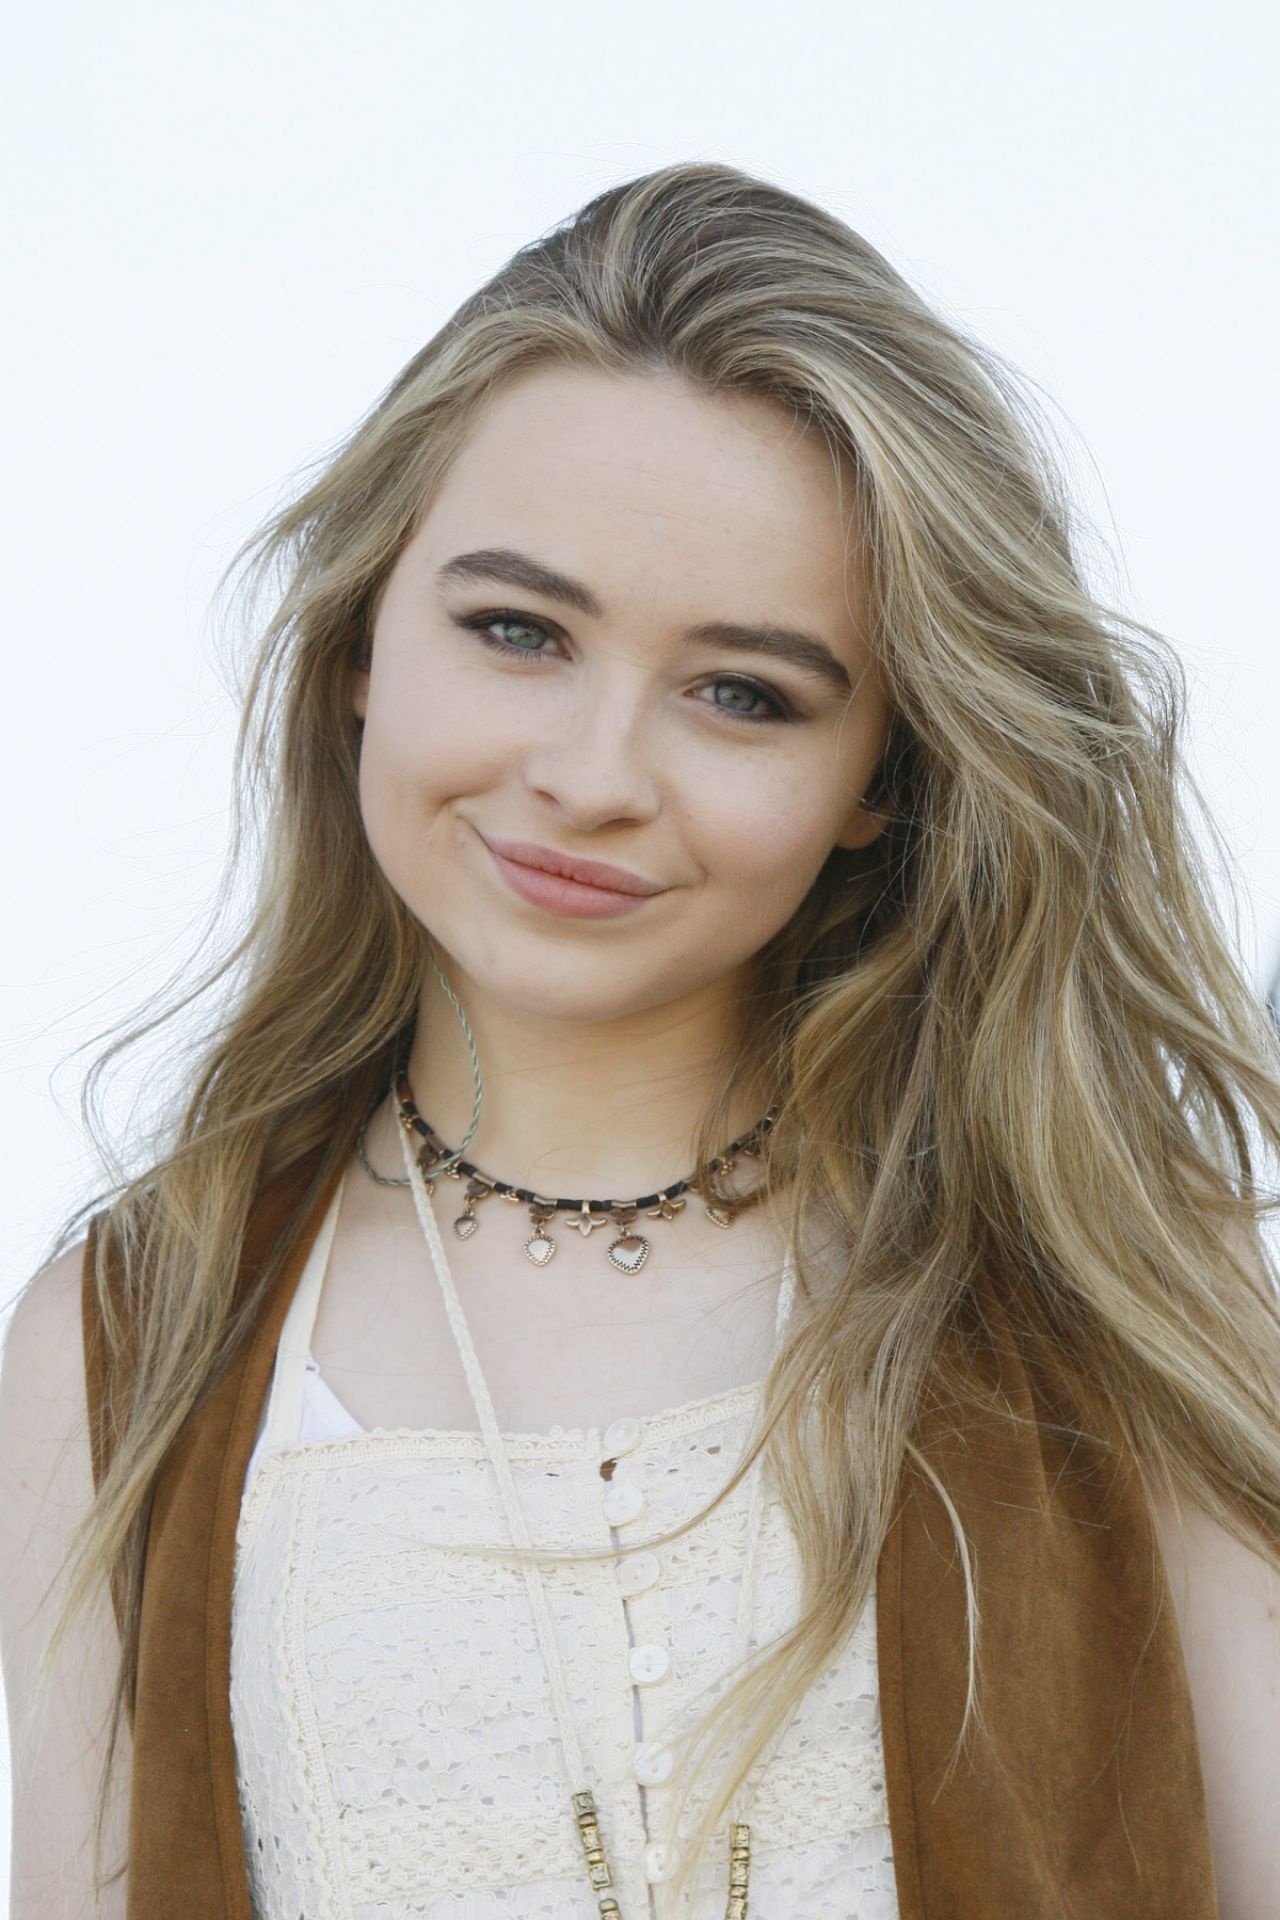 Sabrina Carpenter wallpapers, Celebrity HQ pictures, 4K wallpapers, 2019 wallpapers, 1280x1920 HD Handy